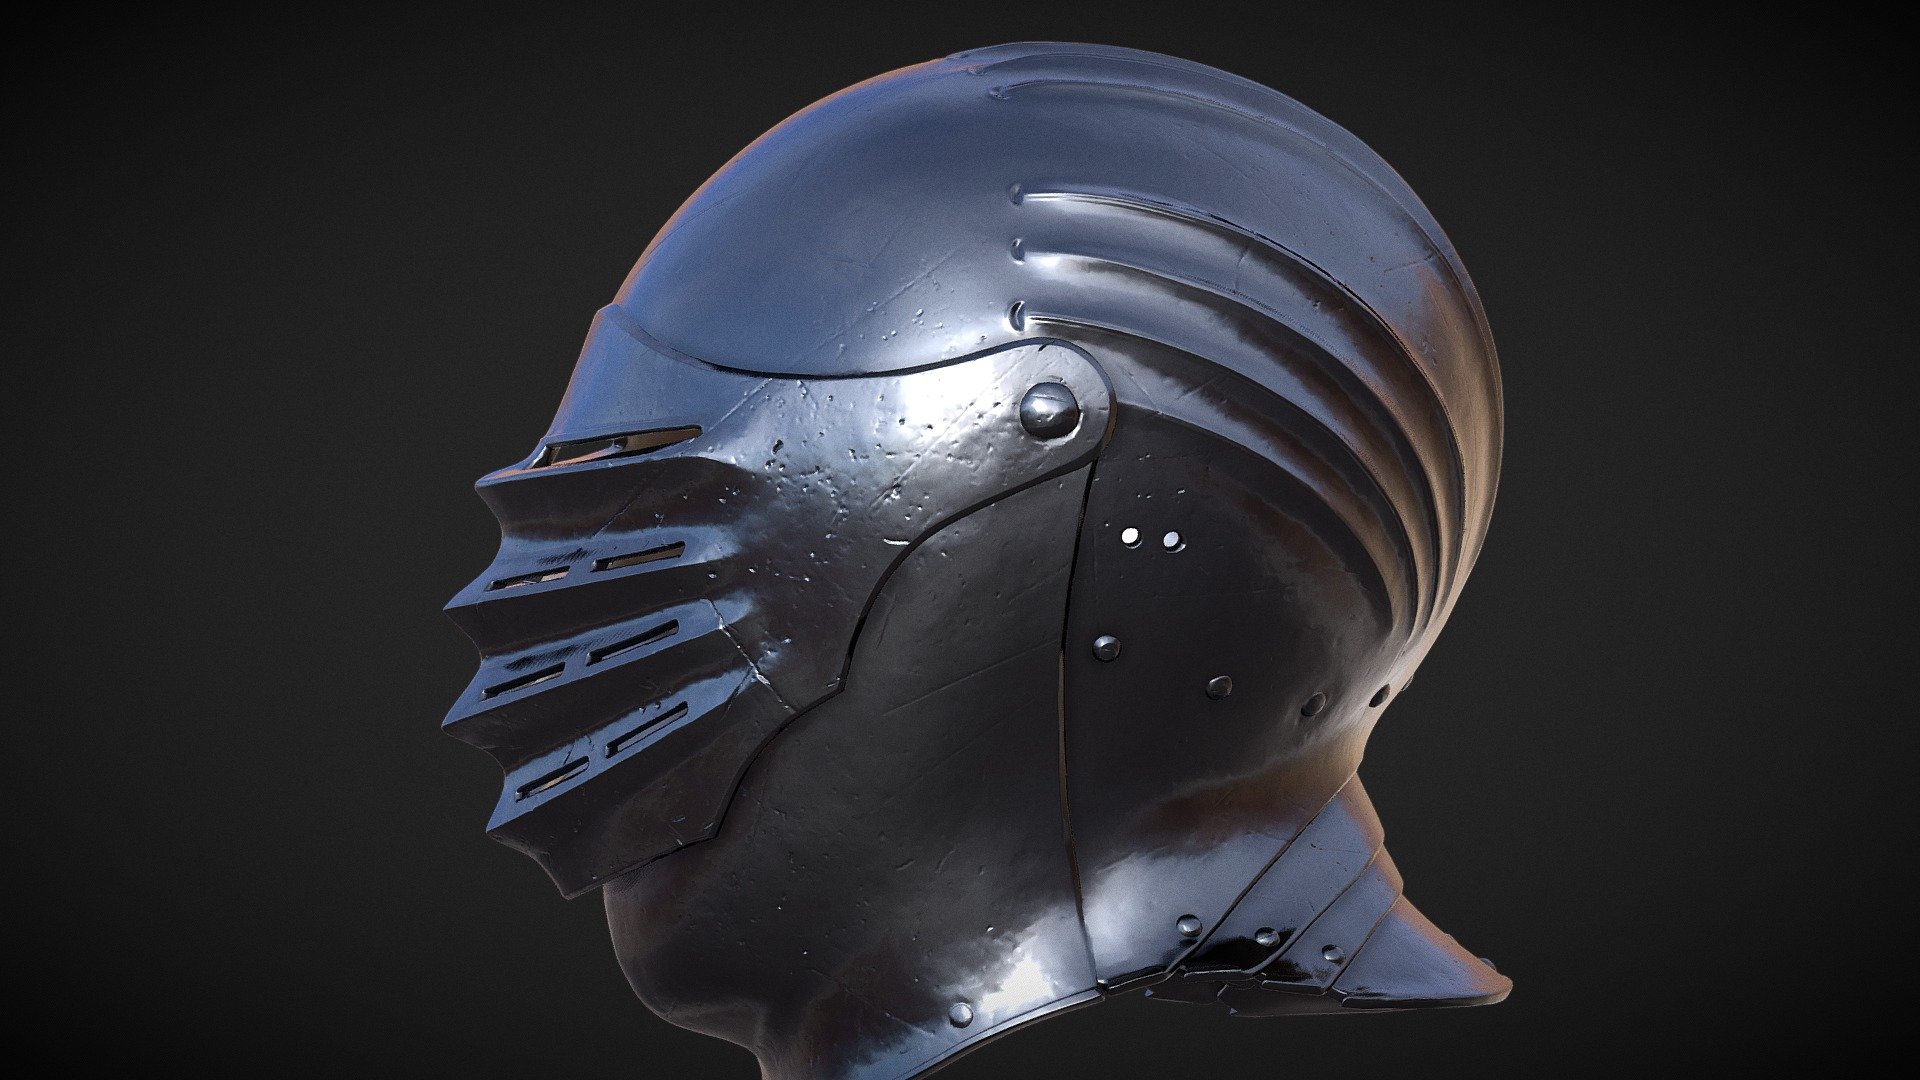 ORNAMENTAL
Maximilian armour is a modern term applied to the style of early 16th-century German plate armour associated with, and possibly first made for the Emperor Maximilian I.

Remodeled in Zbrush.

Let me know if you have any request.

I can make it wearable as well (on request and commissioned)

Credit: &ldquo;Maximilian Helmet